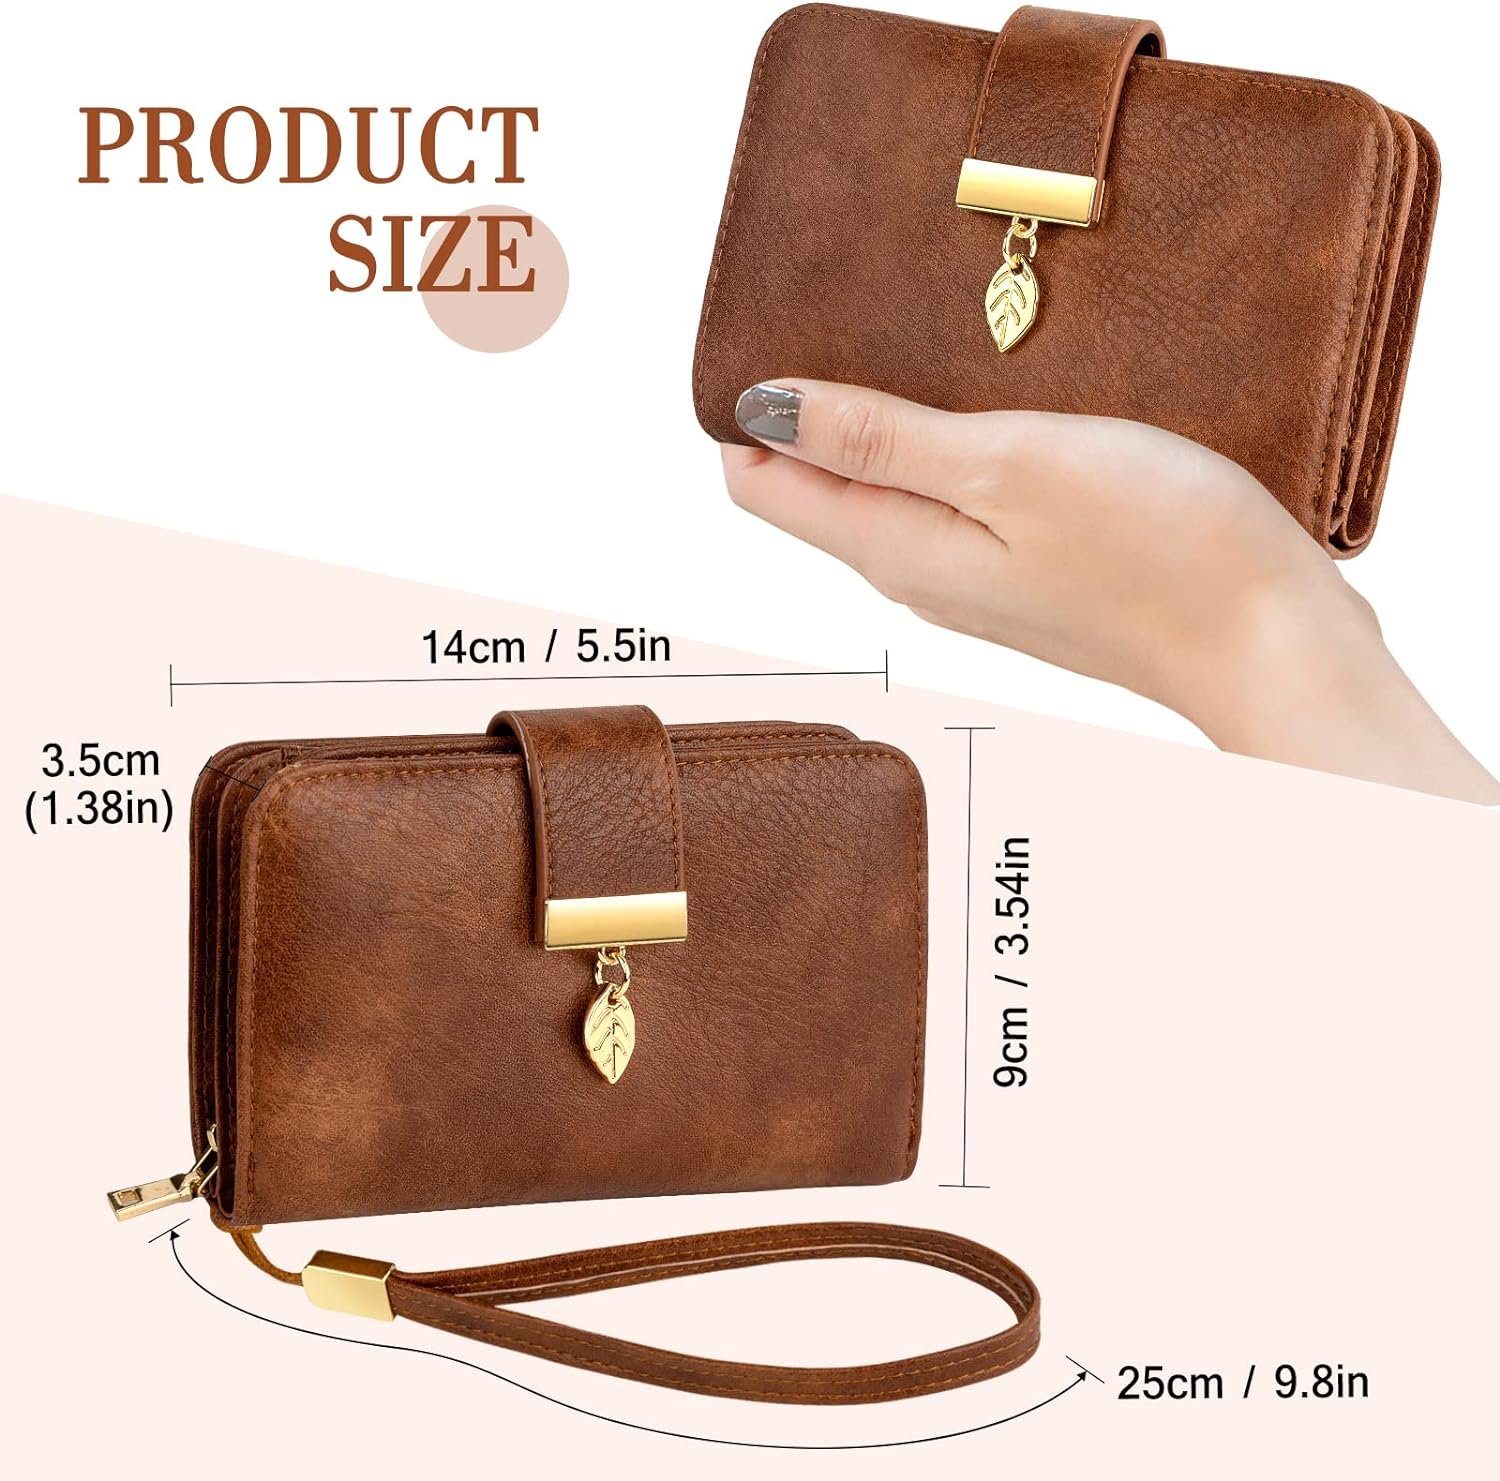 Small RFID Blocking Wallet for Women Leather Compact Bifold Wallet 18 Card Slots Ladies Wallets with Coin Pocket